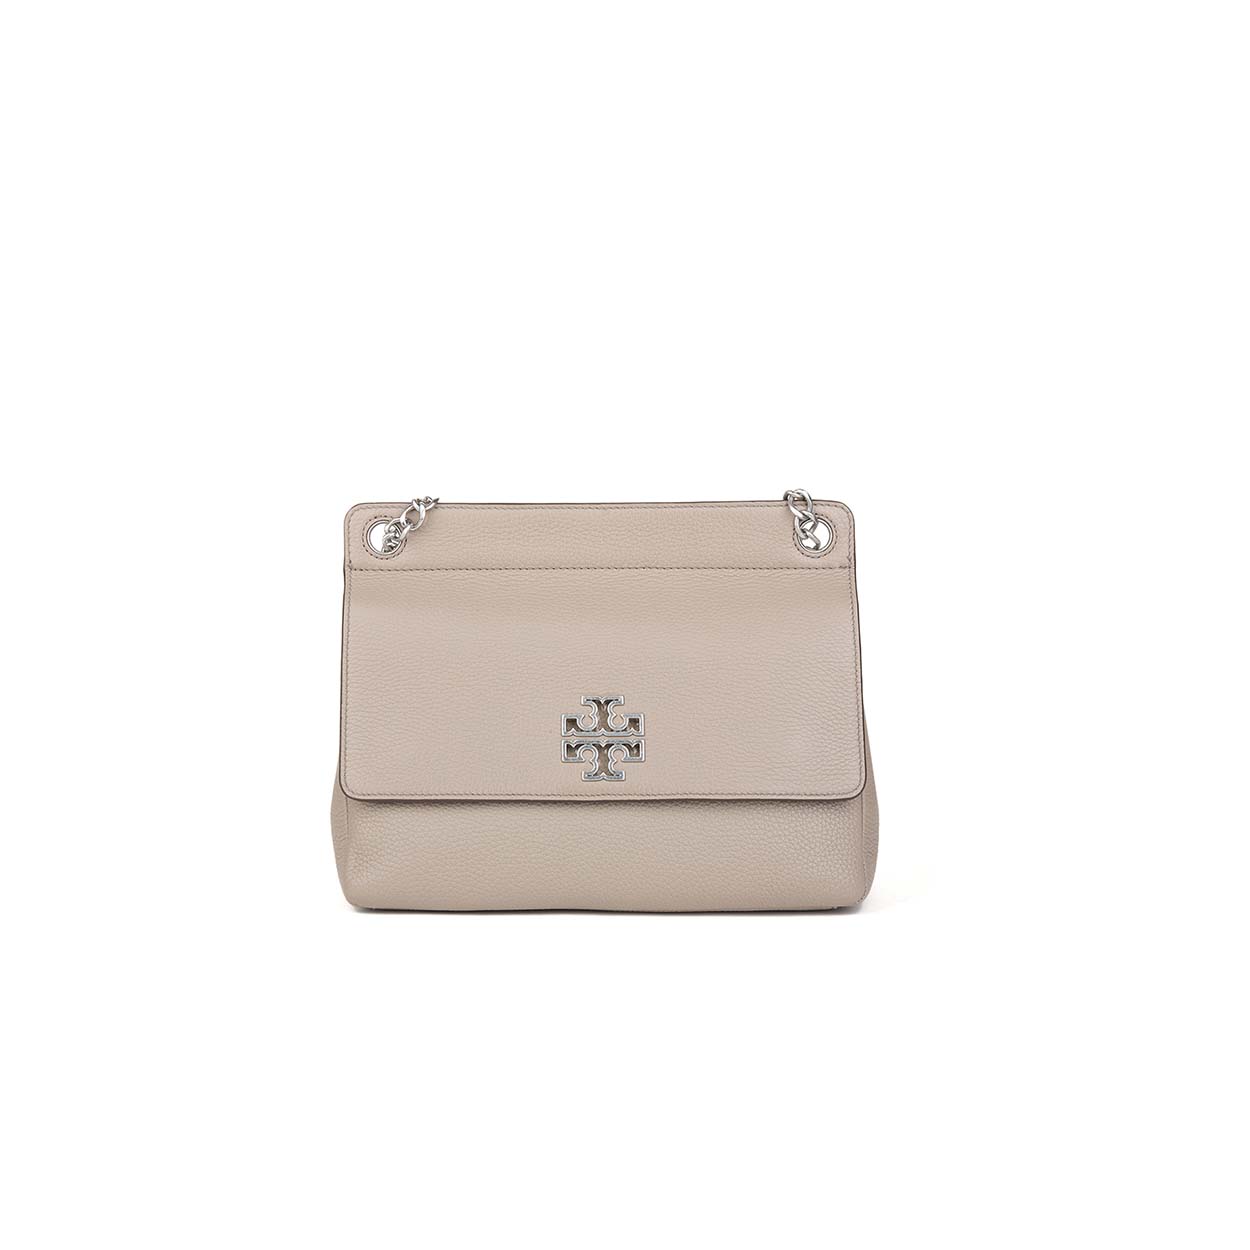 Tory Burch Mouse Grey Logo Flap Bag - Tory Burch - Purchase on Ventis.